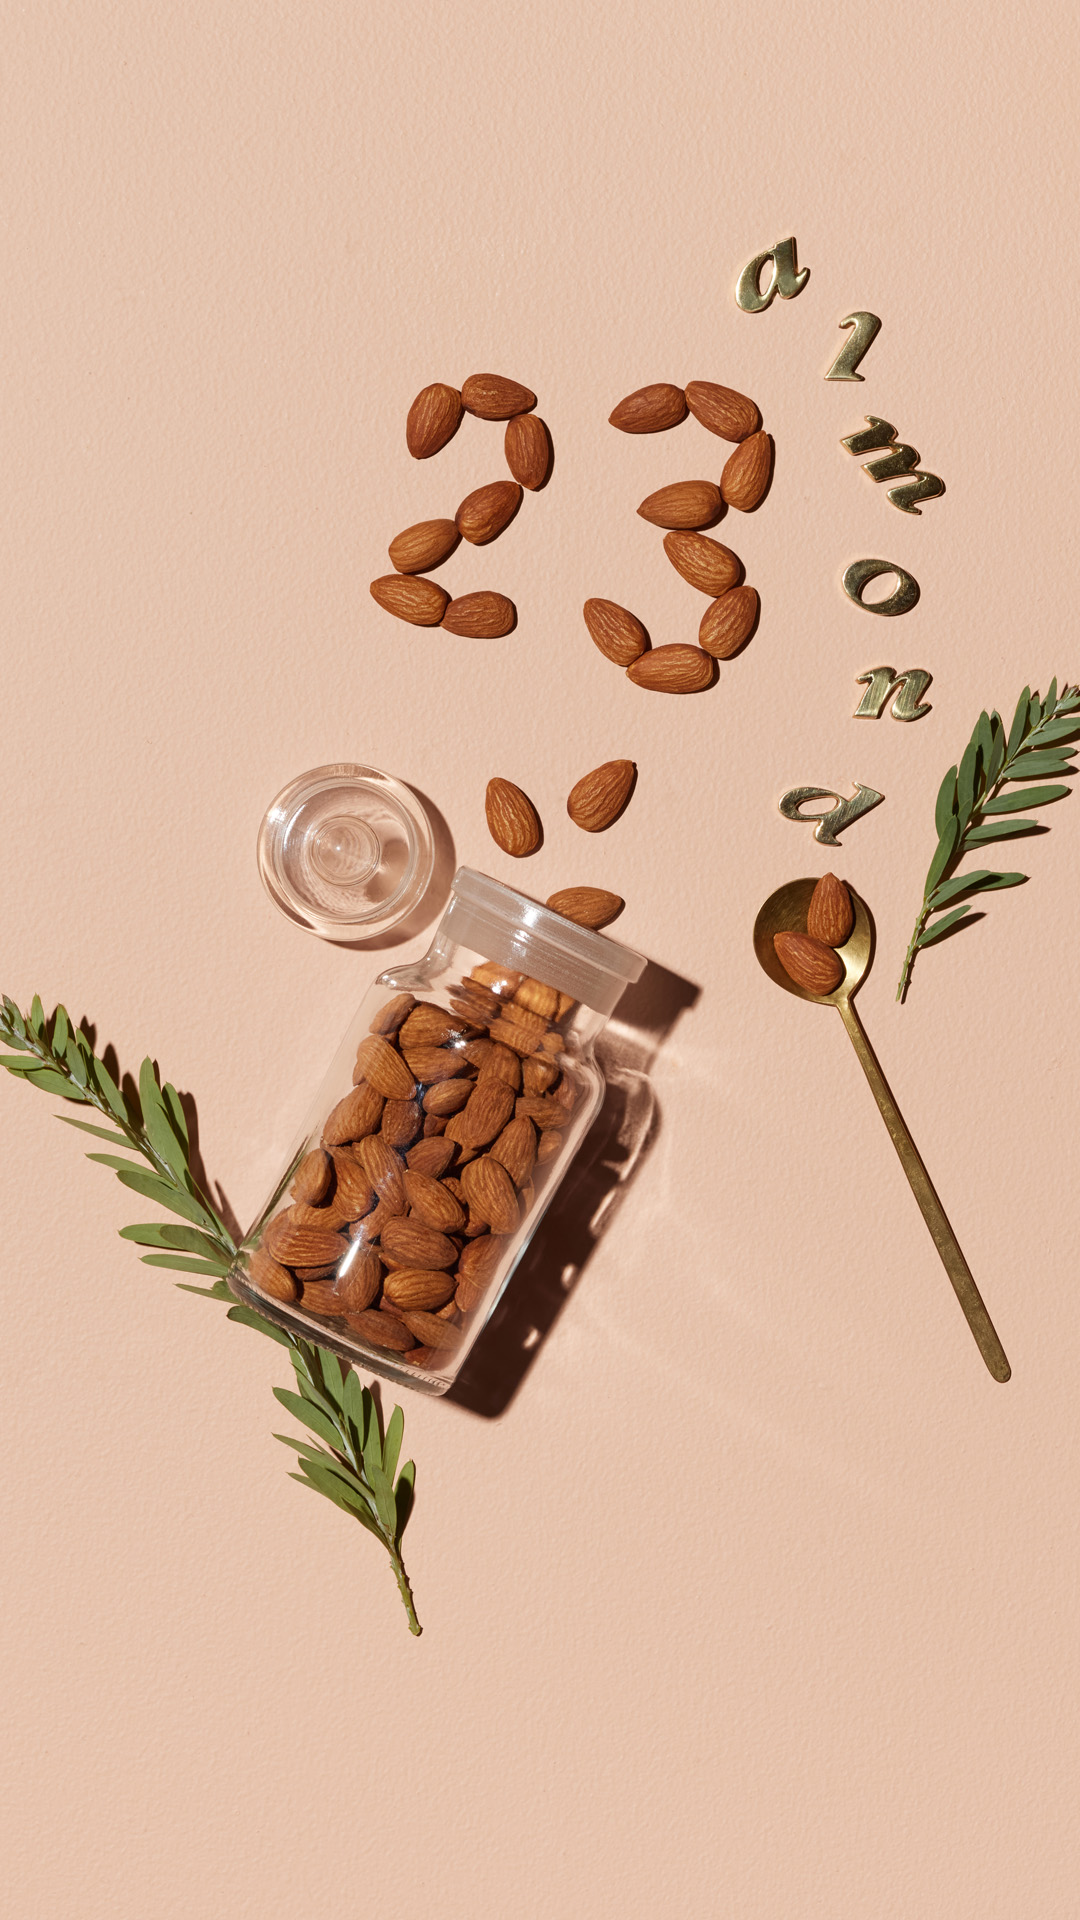 23 almonds a day keeps the doctor away